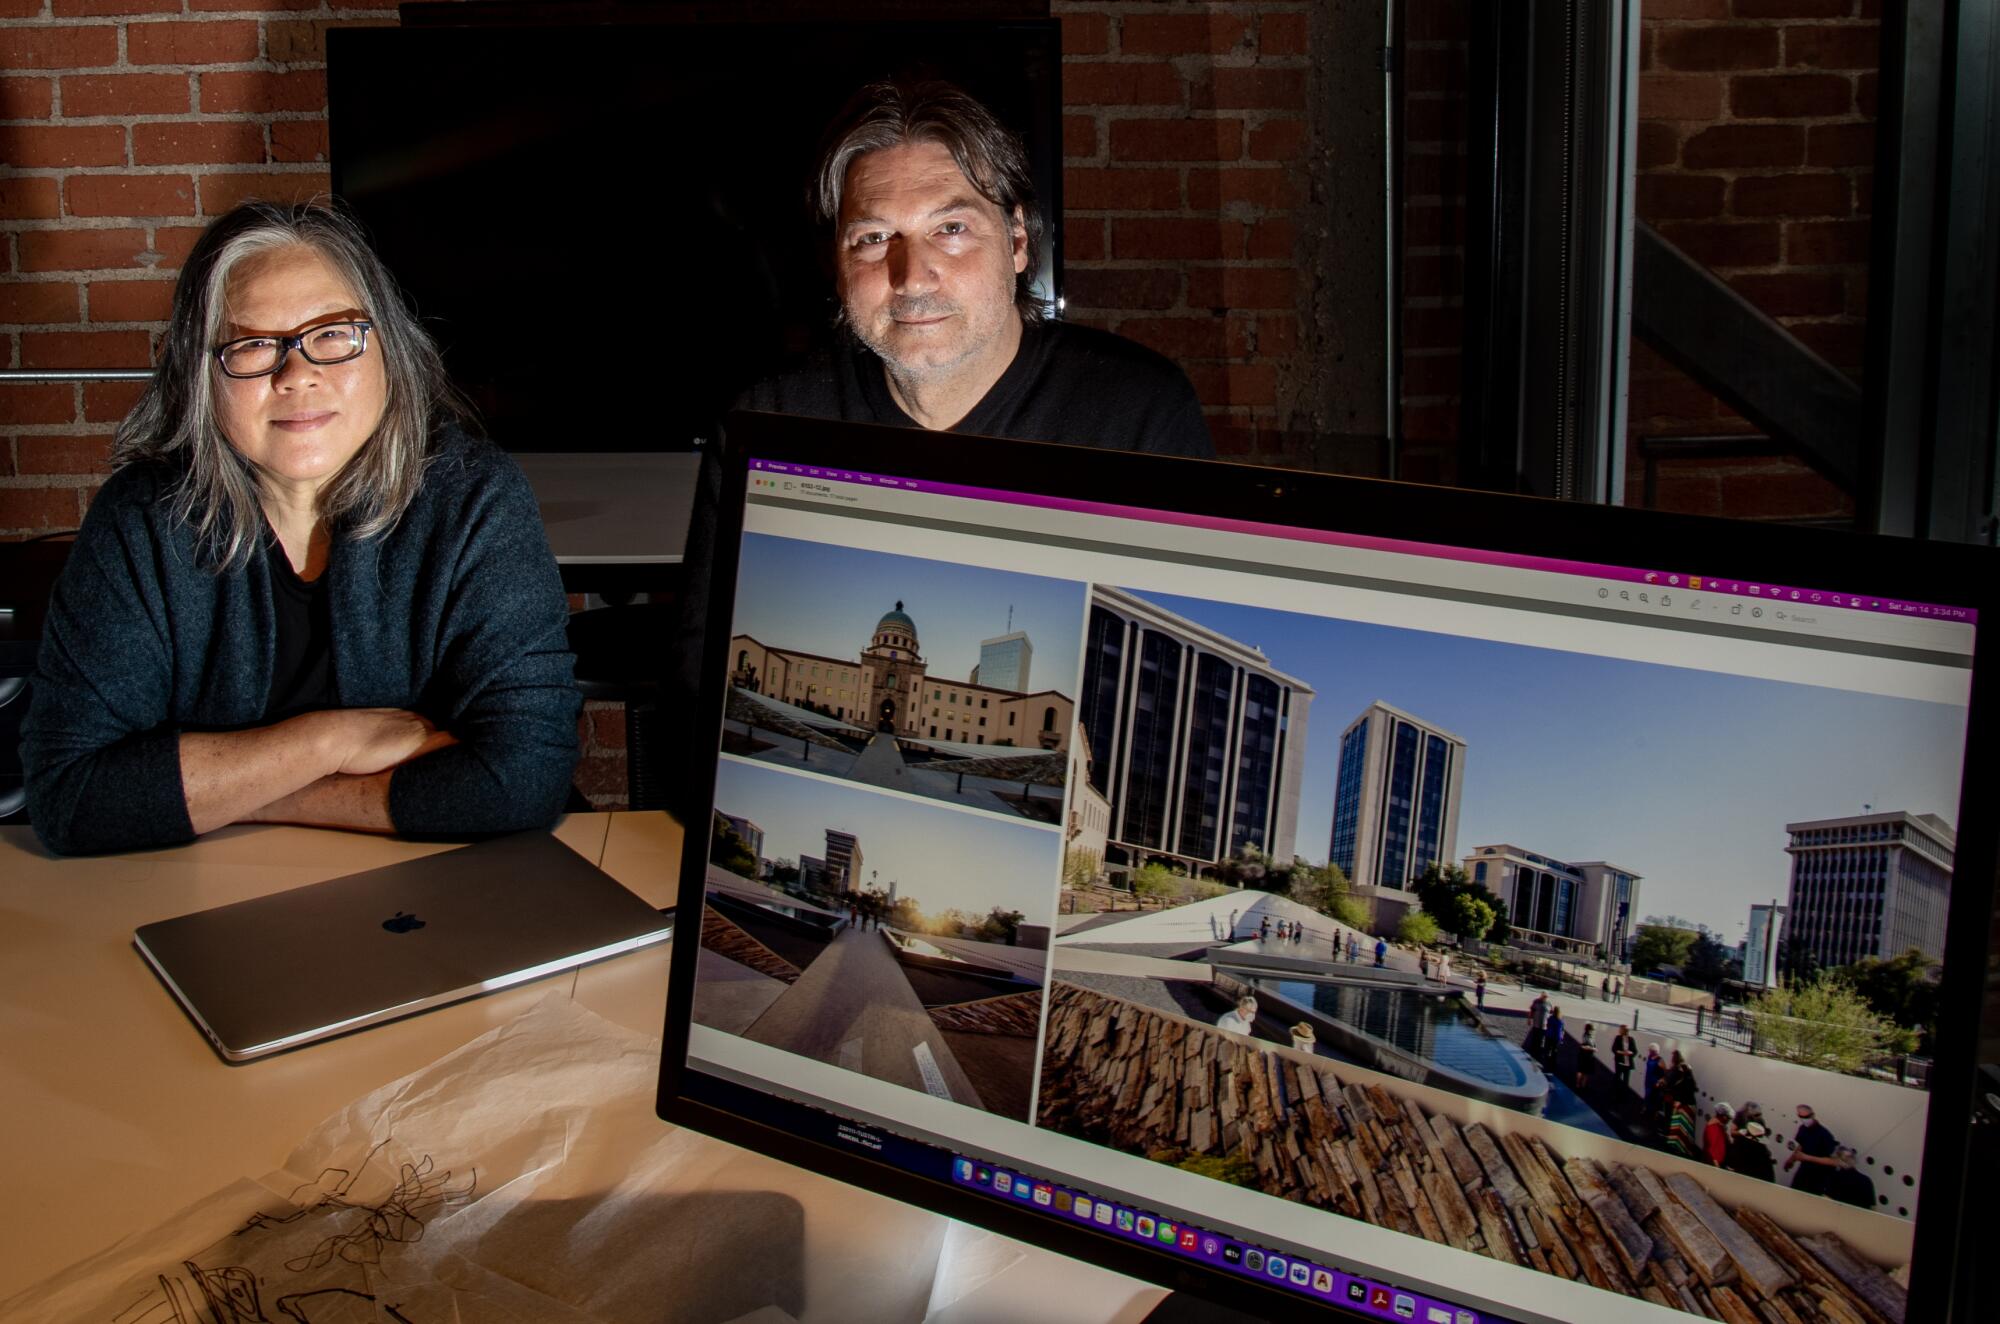 A woman and man sit at a wood table in moody light, behind a monitor bearing images of the Jan. 8 memorial.